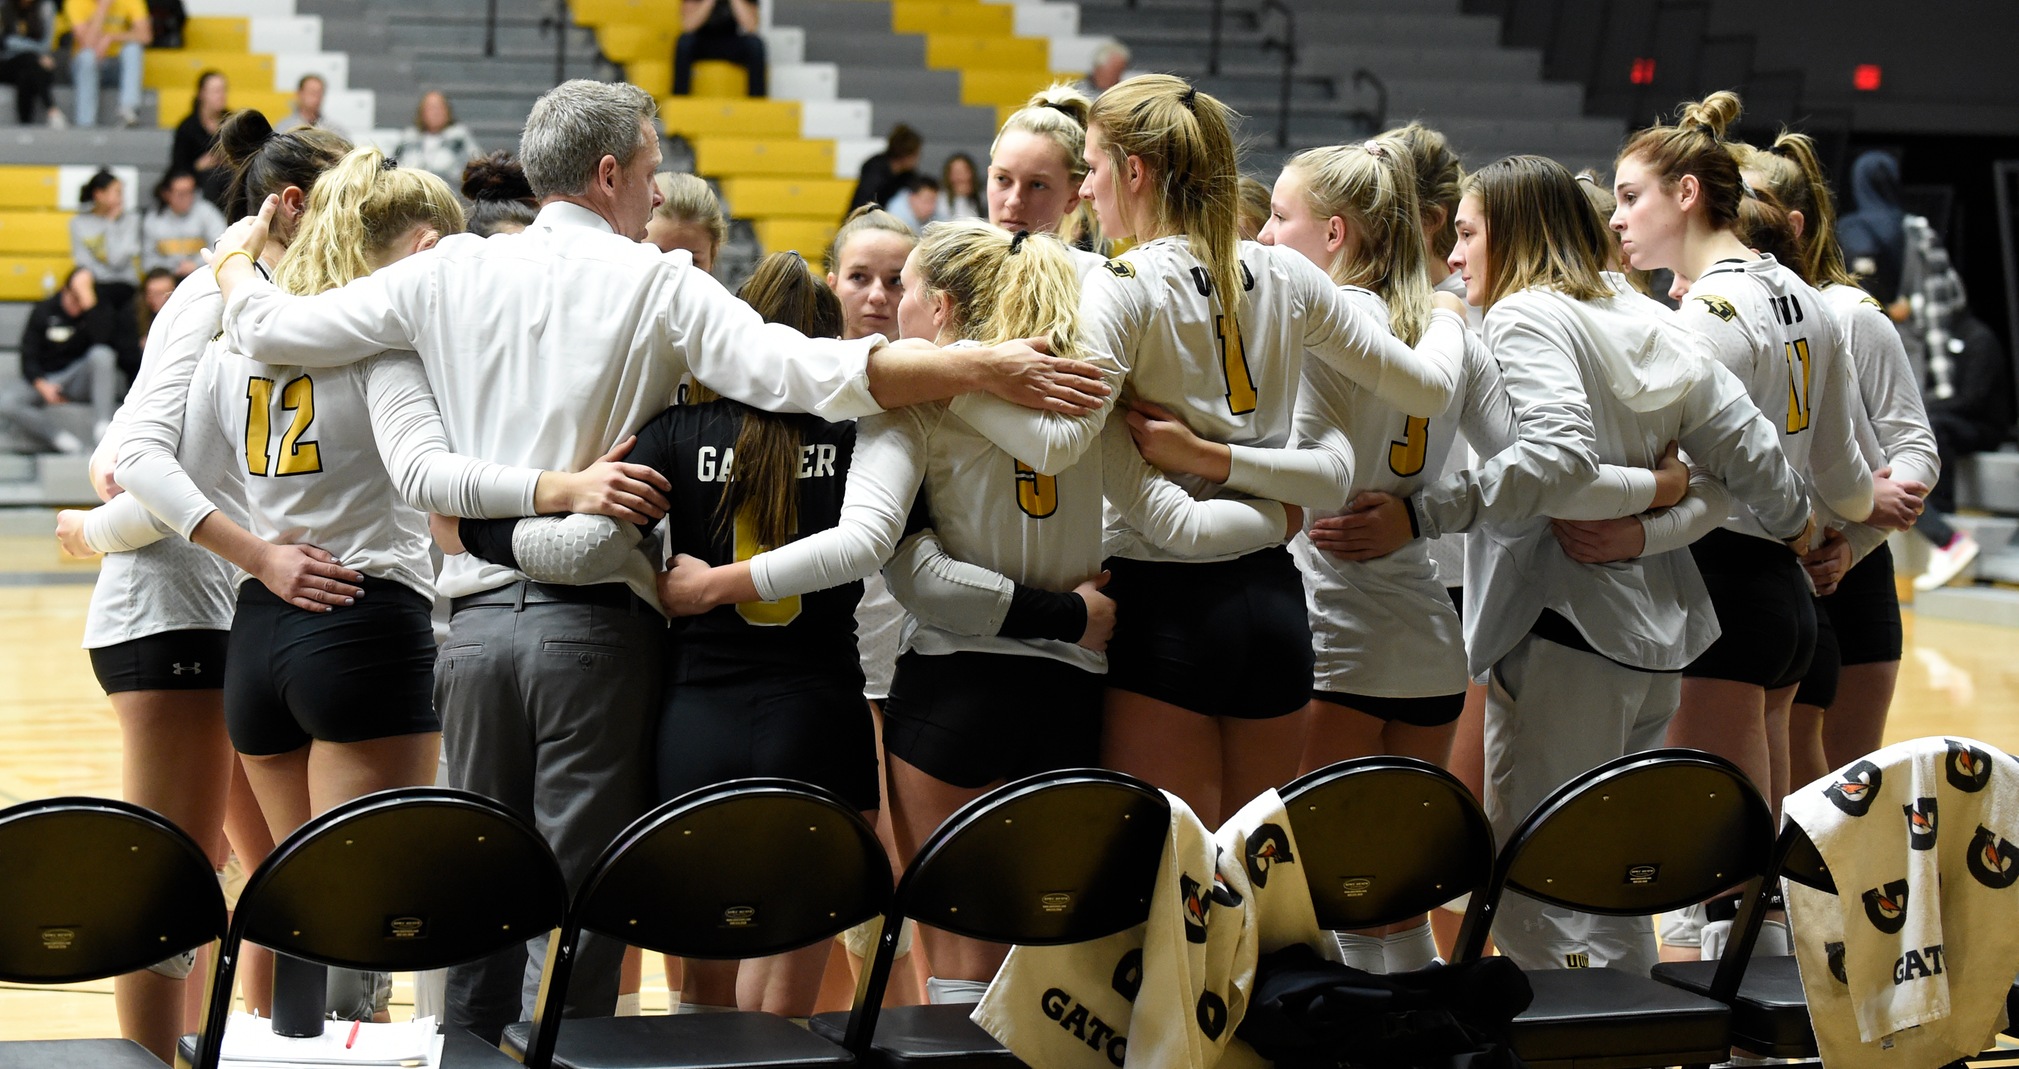 UW-Oshkosh compiled a 21-10 record in 2019 for its 19th 20+ win season in 21 years.